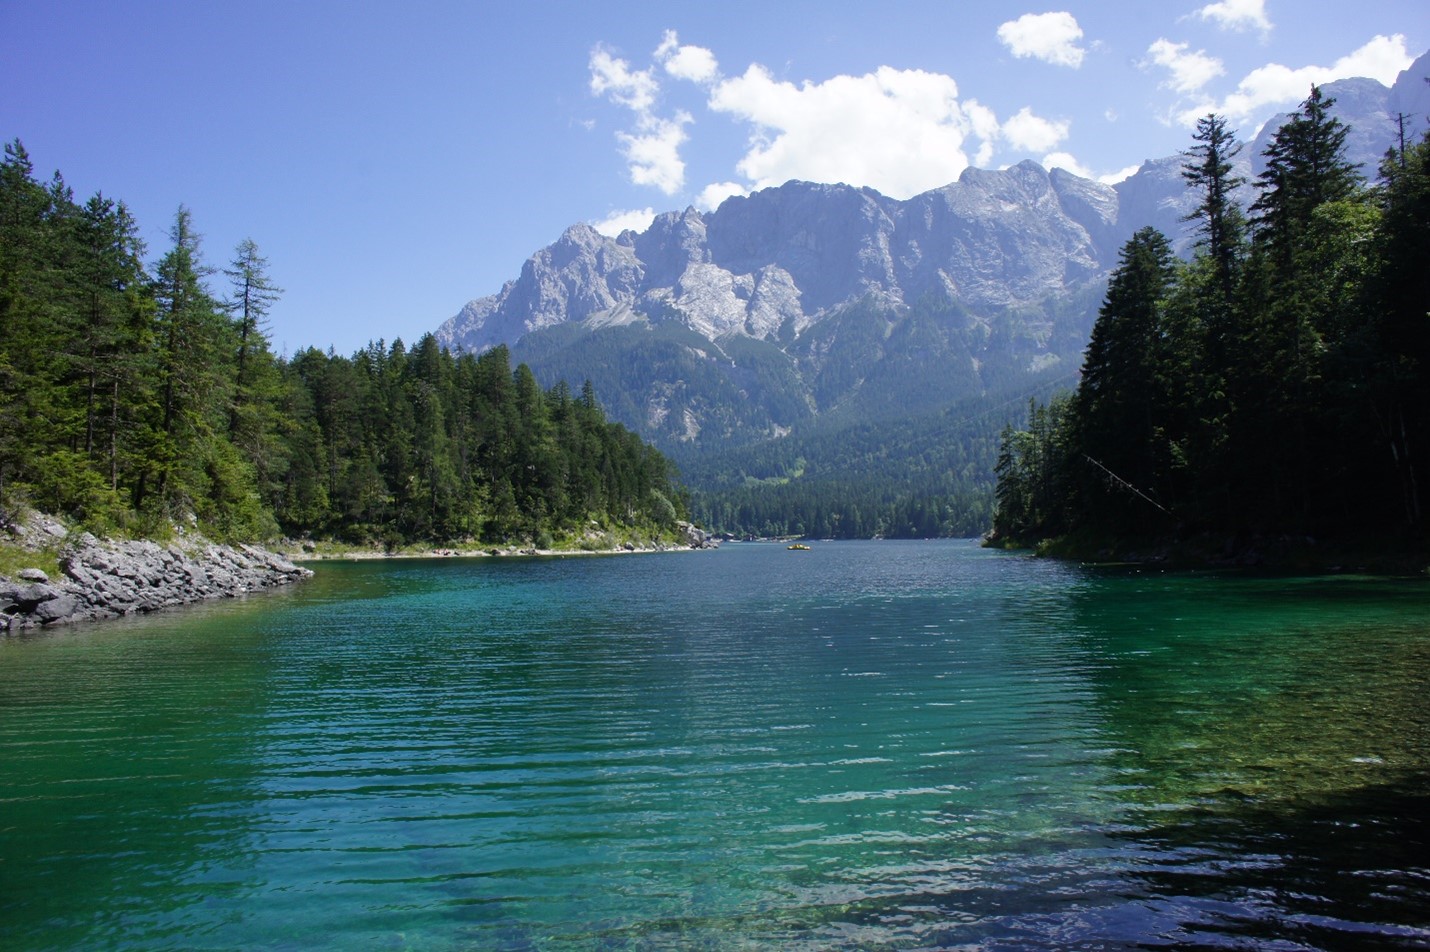 A photograph of a beautiful jewel colored lake surrounded by trees, with a background of mountains